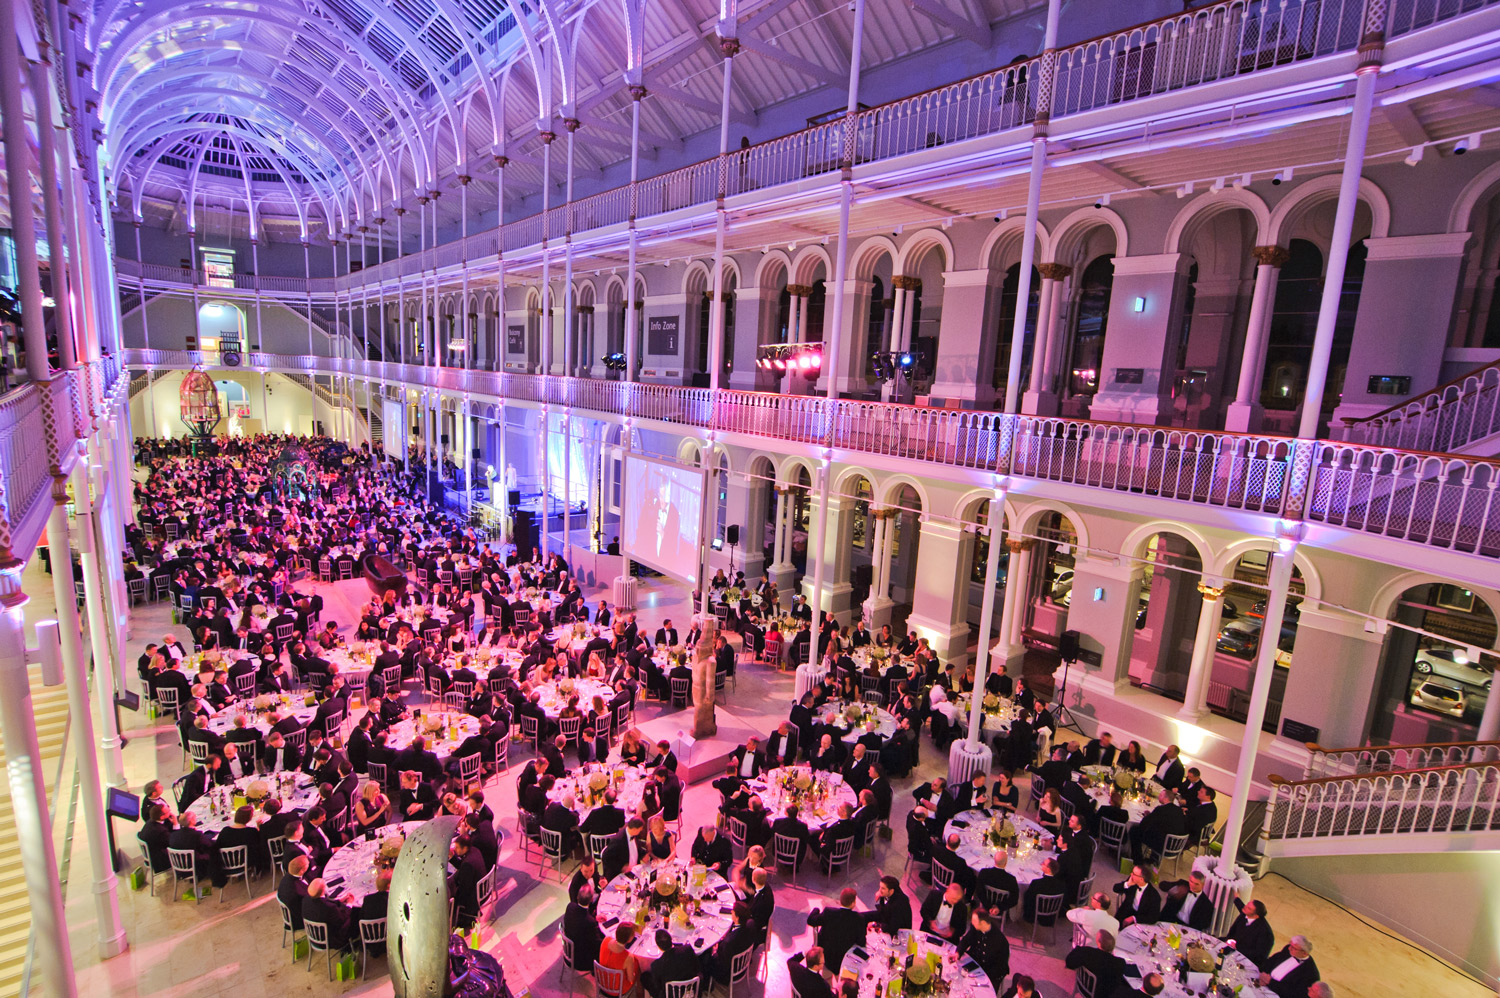 A large dinner event at the National Museum of Scotland.